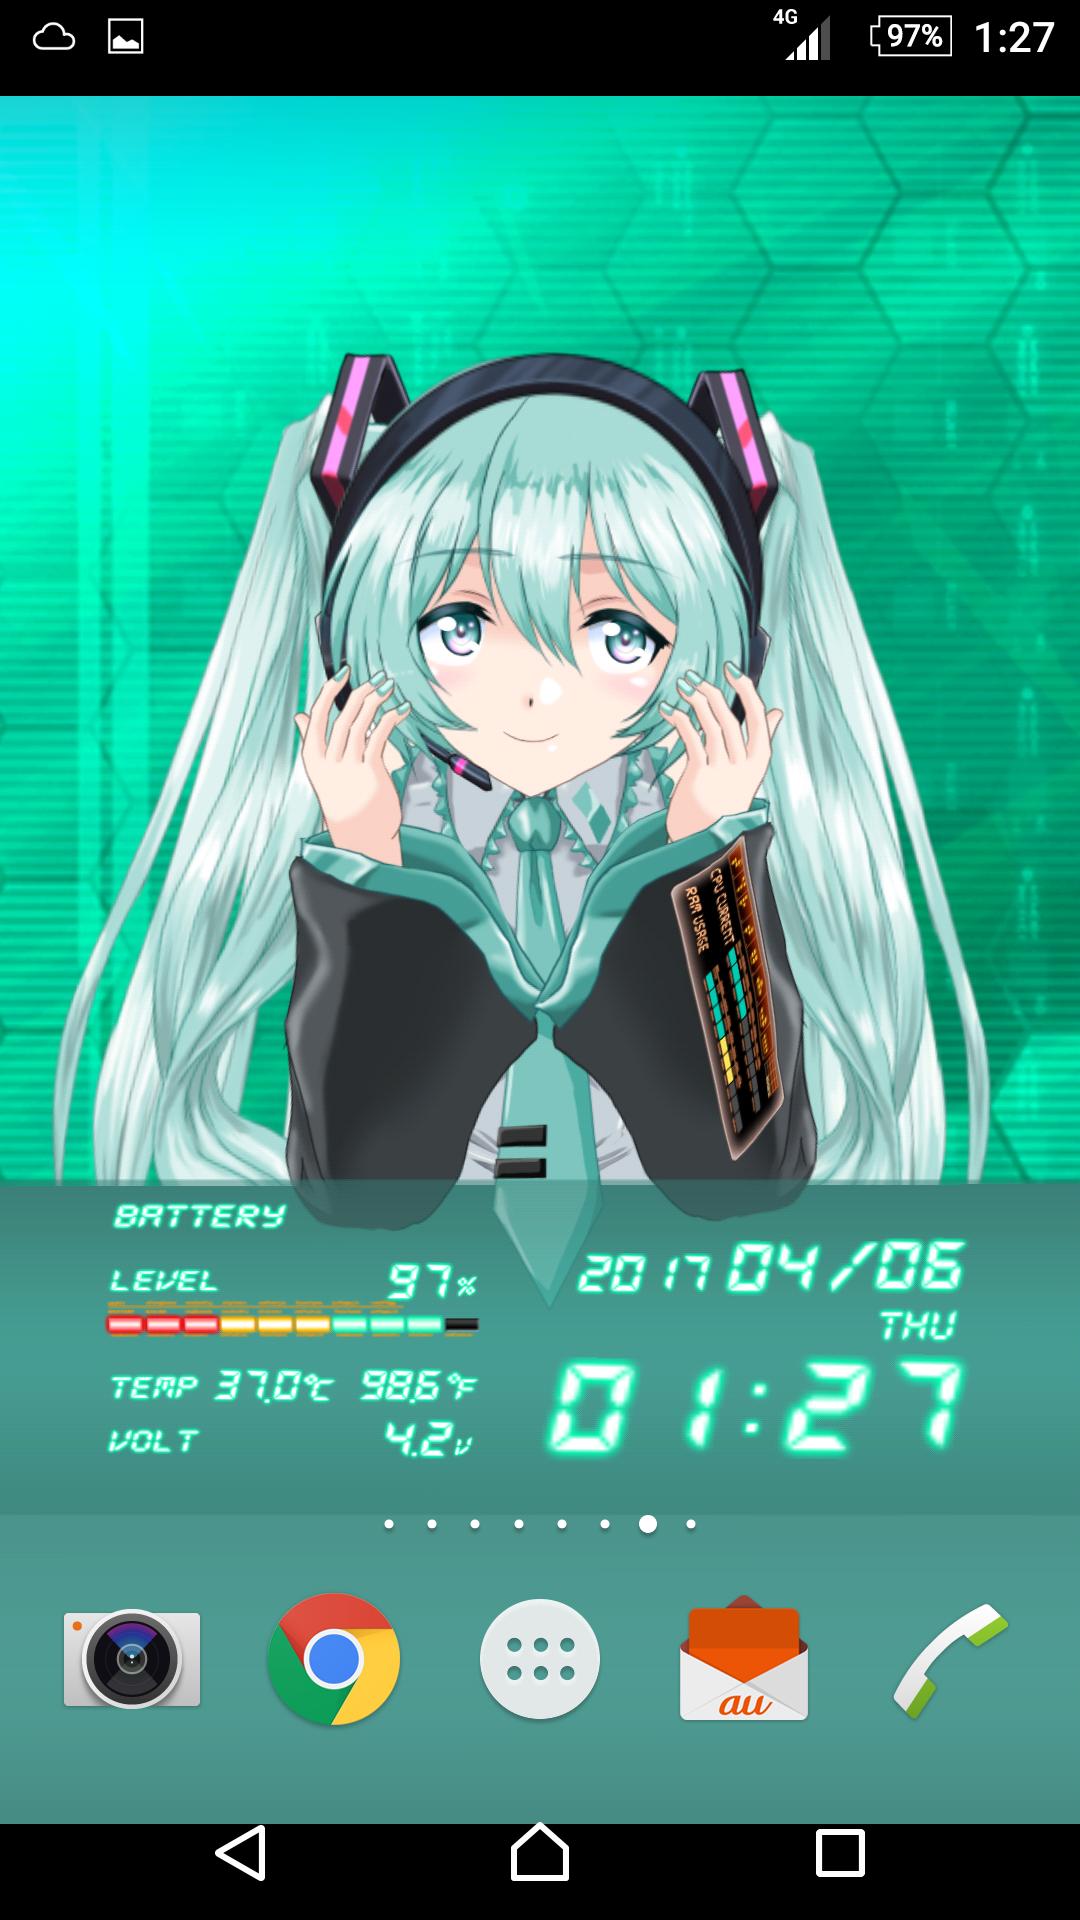 Miku 2d Anime Livewallpaper For Android Apk Download